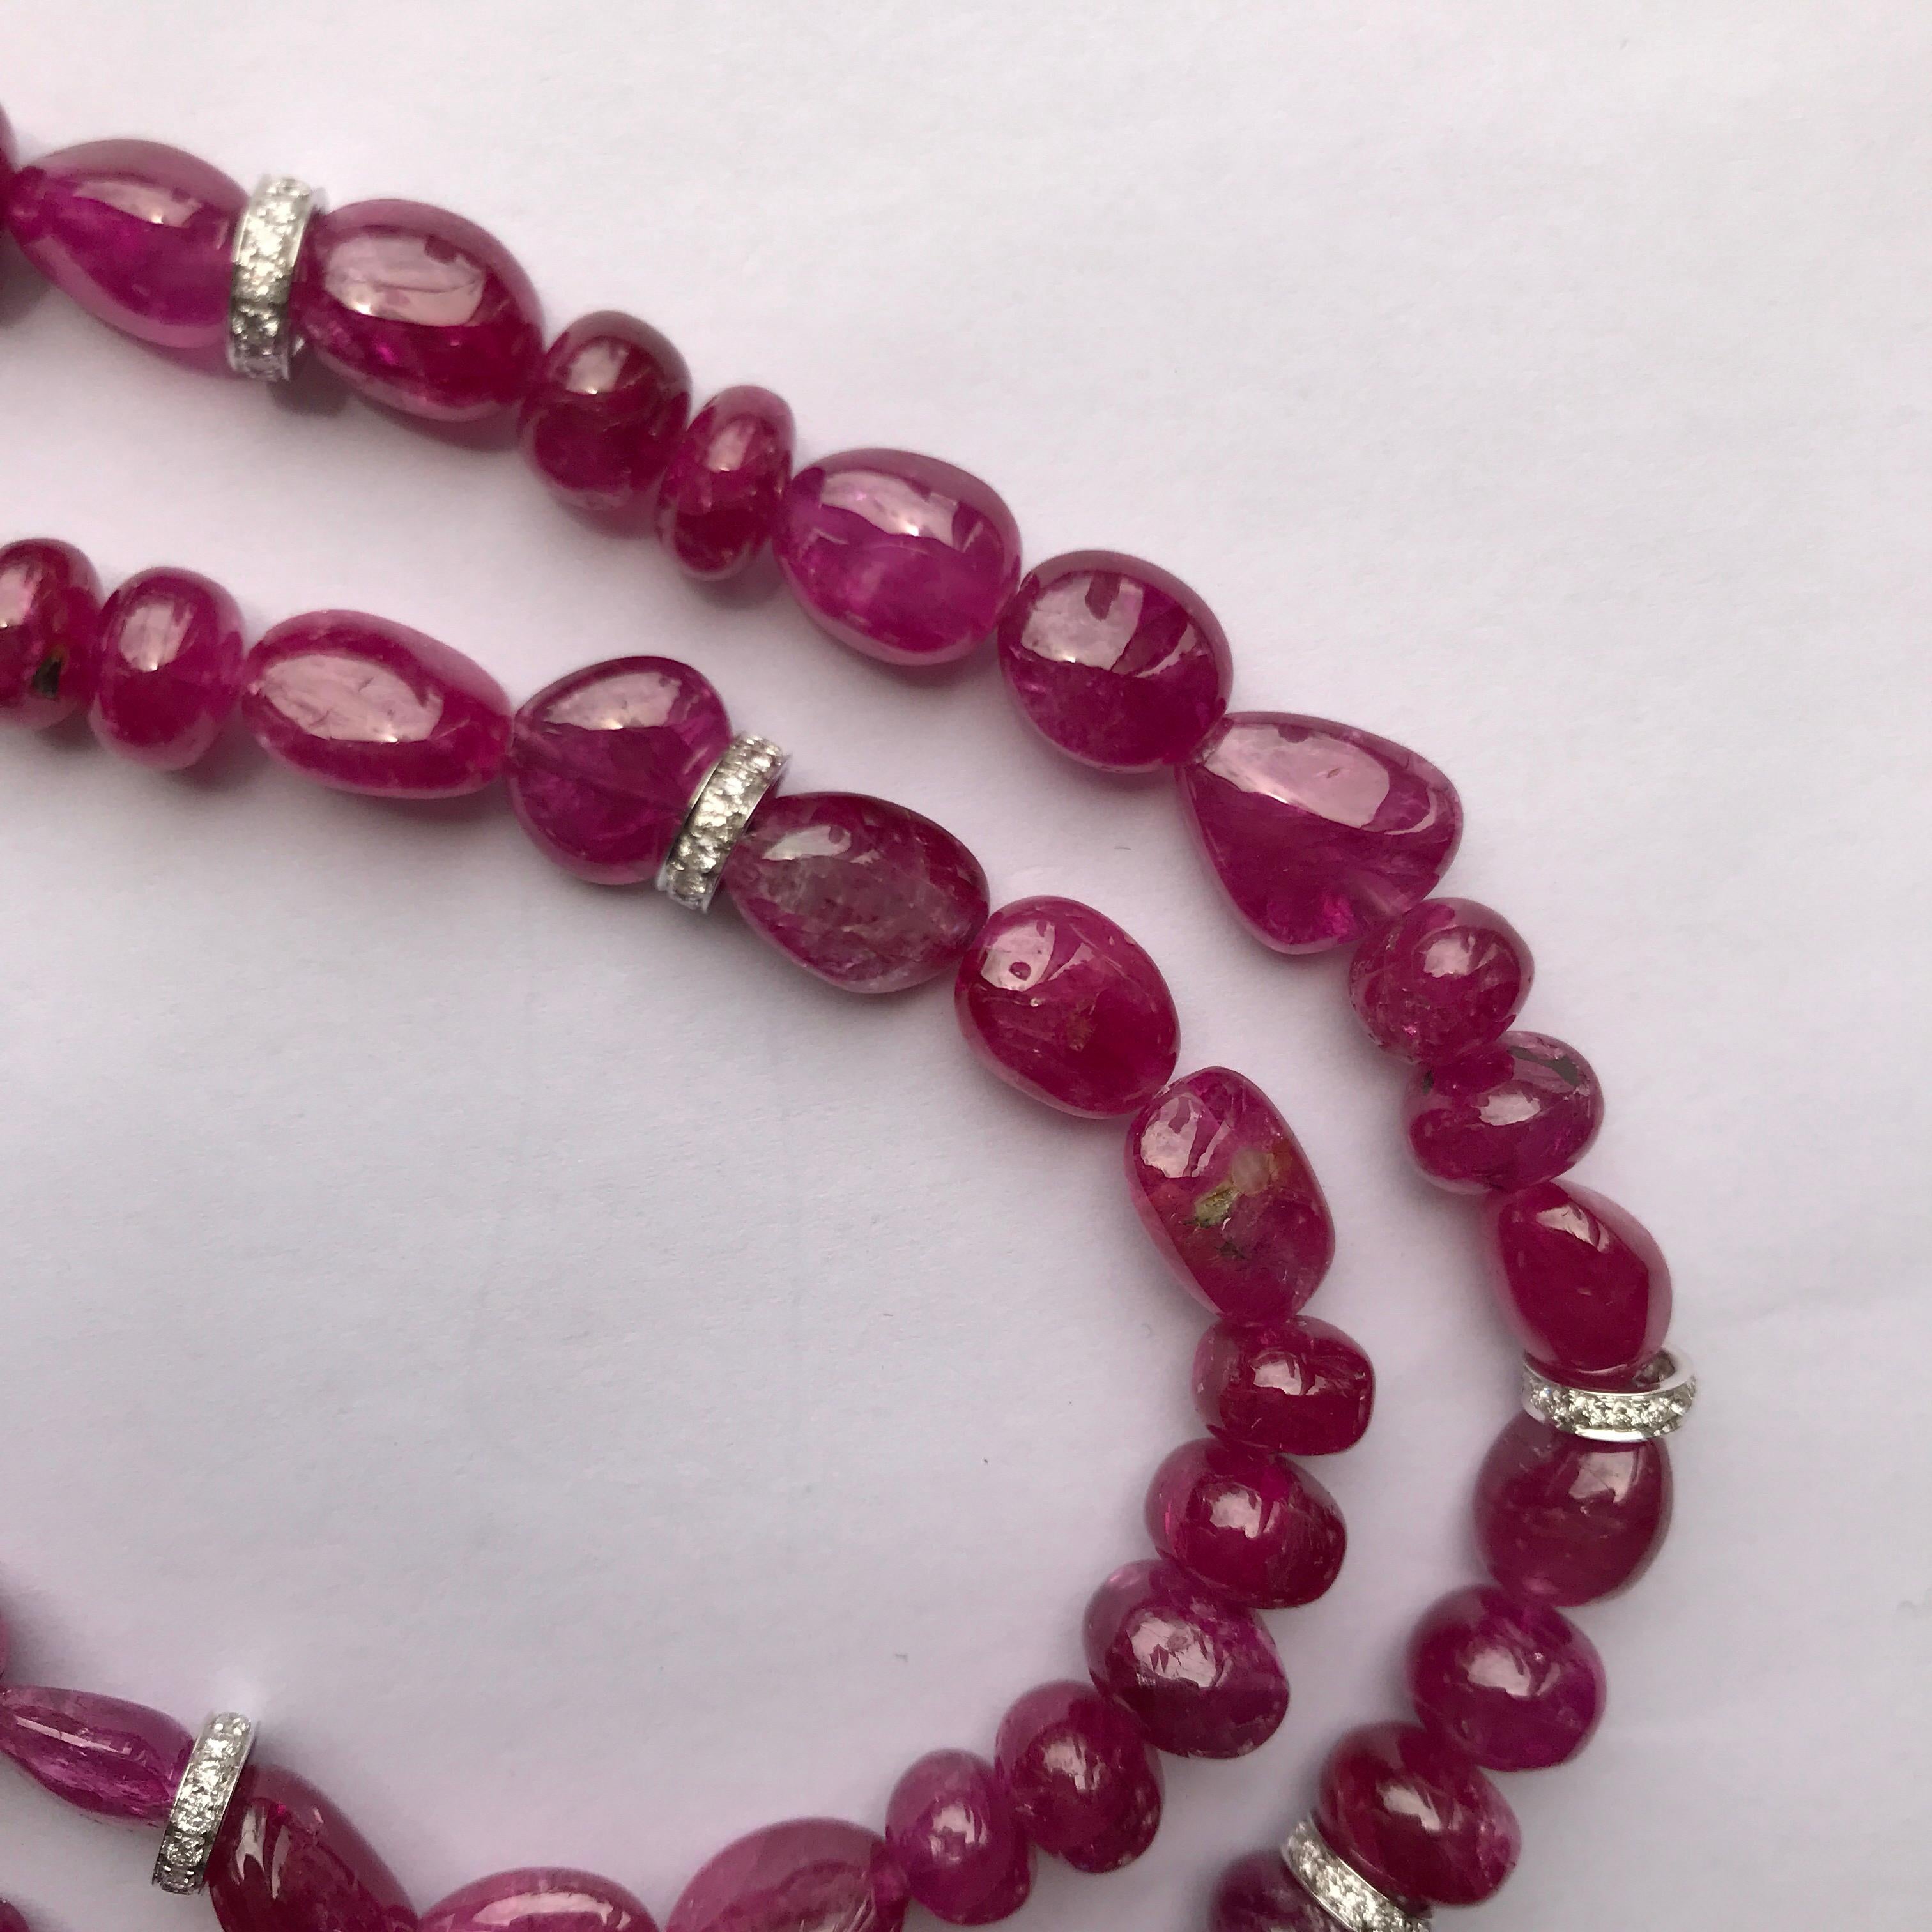 475 Carat Natural Burmese Ruby Beads Multi Strand Necklace For Sale at ...